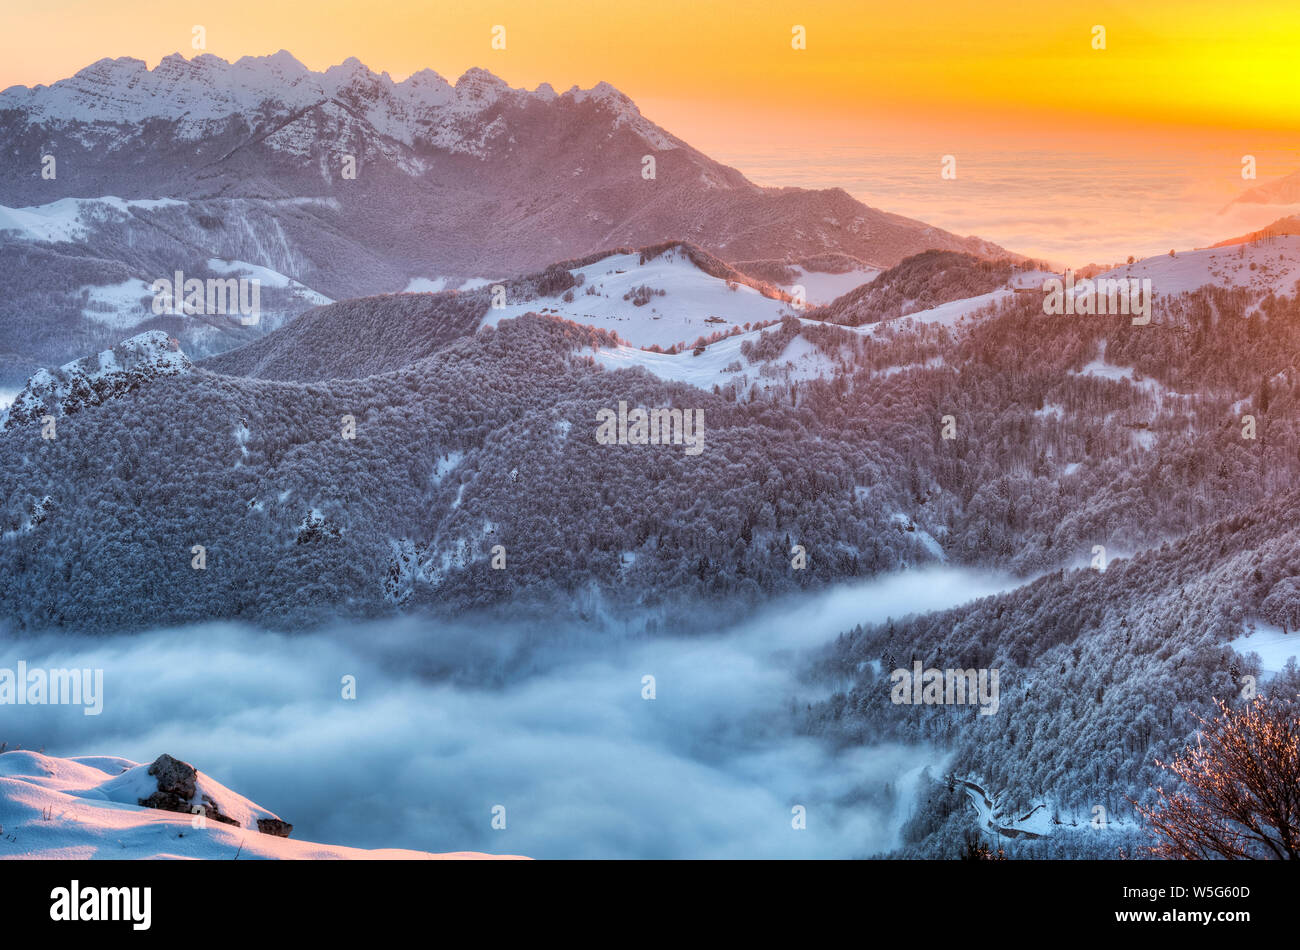 Italy, Lombardy, Orobie Alps Regional Park, Mt. Resegone from Piani d'Alben Stock Photo